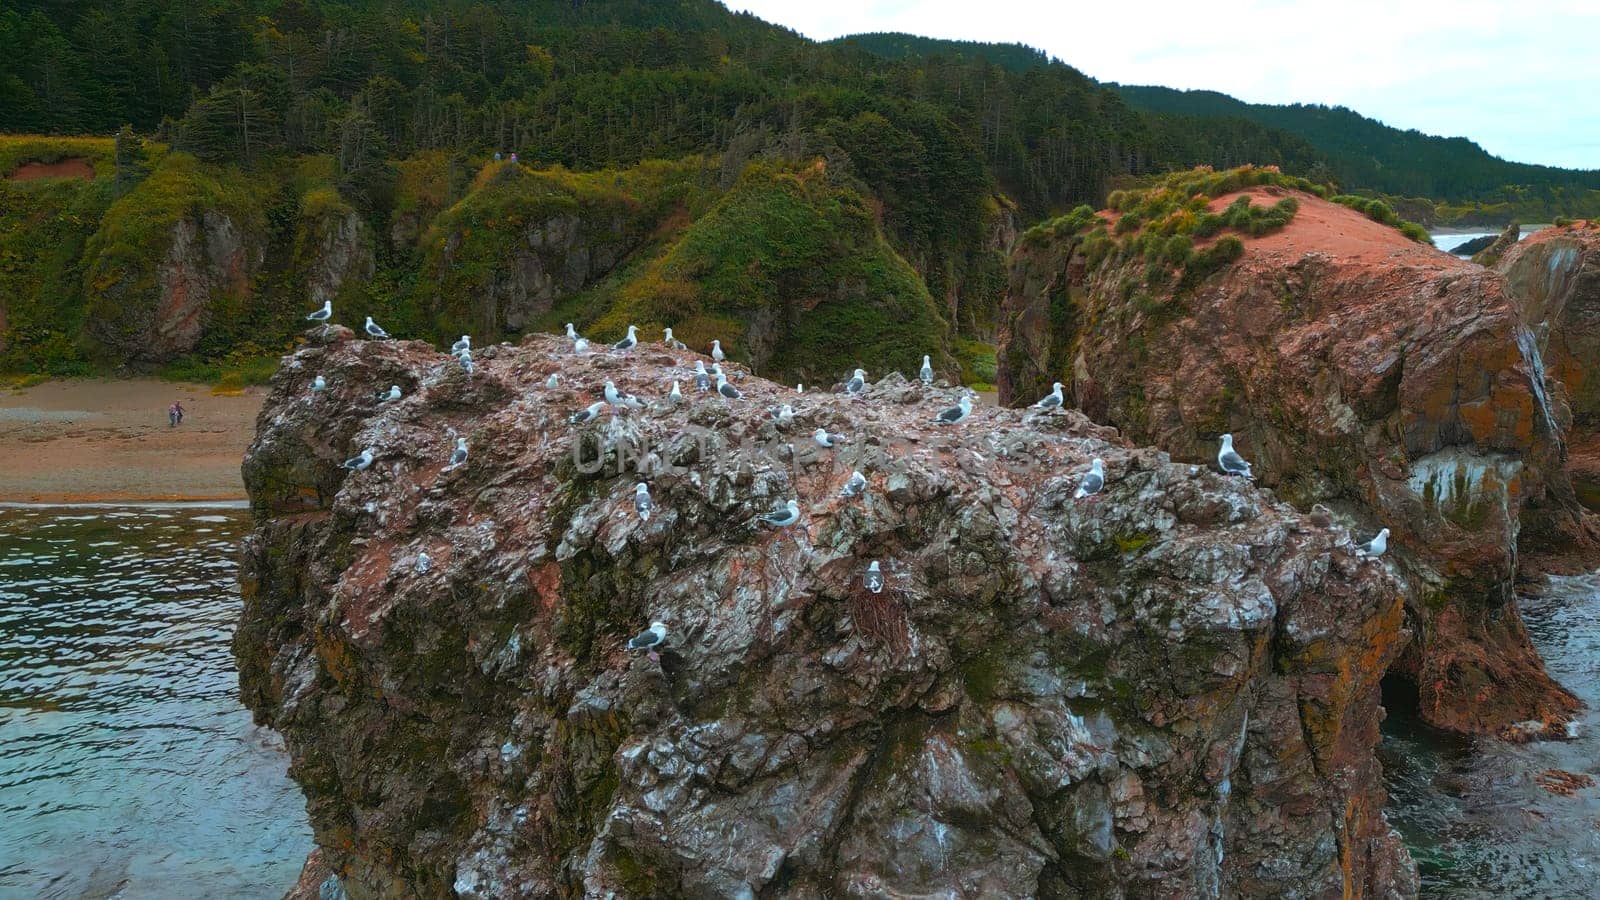 Top view of cliff with flock of seagulls. Clip. Wild coast with marine fauna on rocks in sea. Flocks of seagulls on sea rocks off coast of wild island.